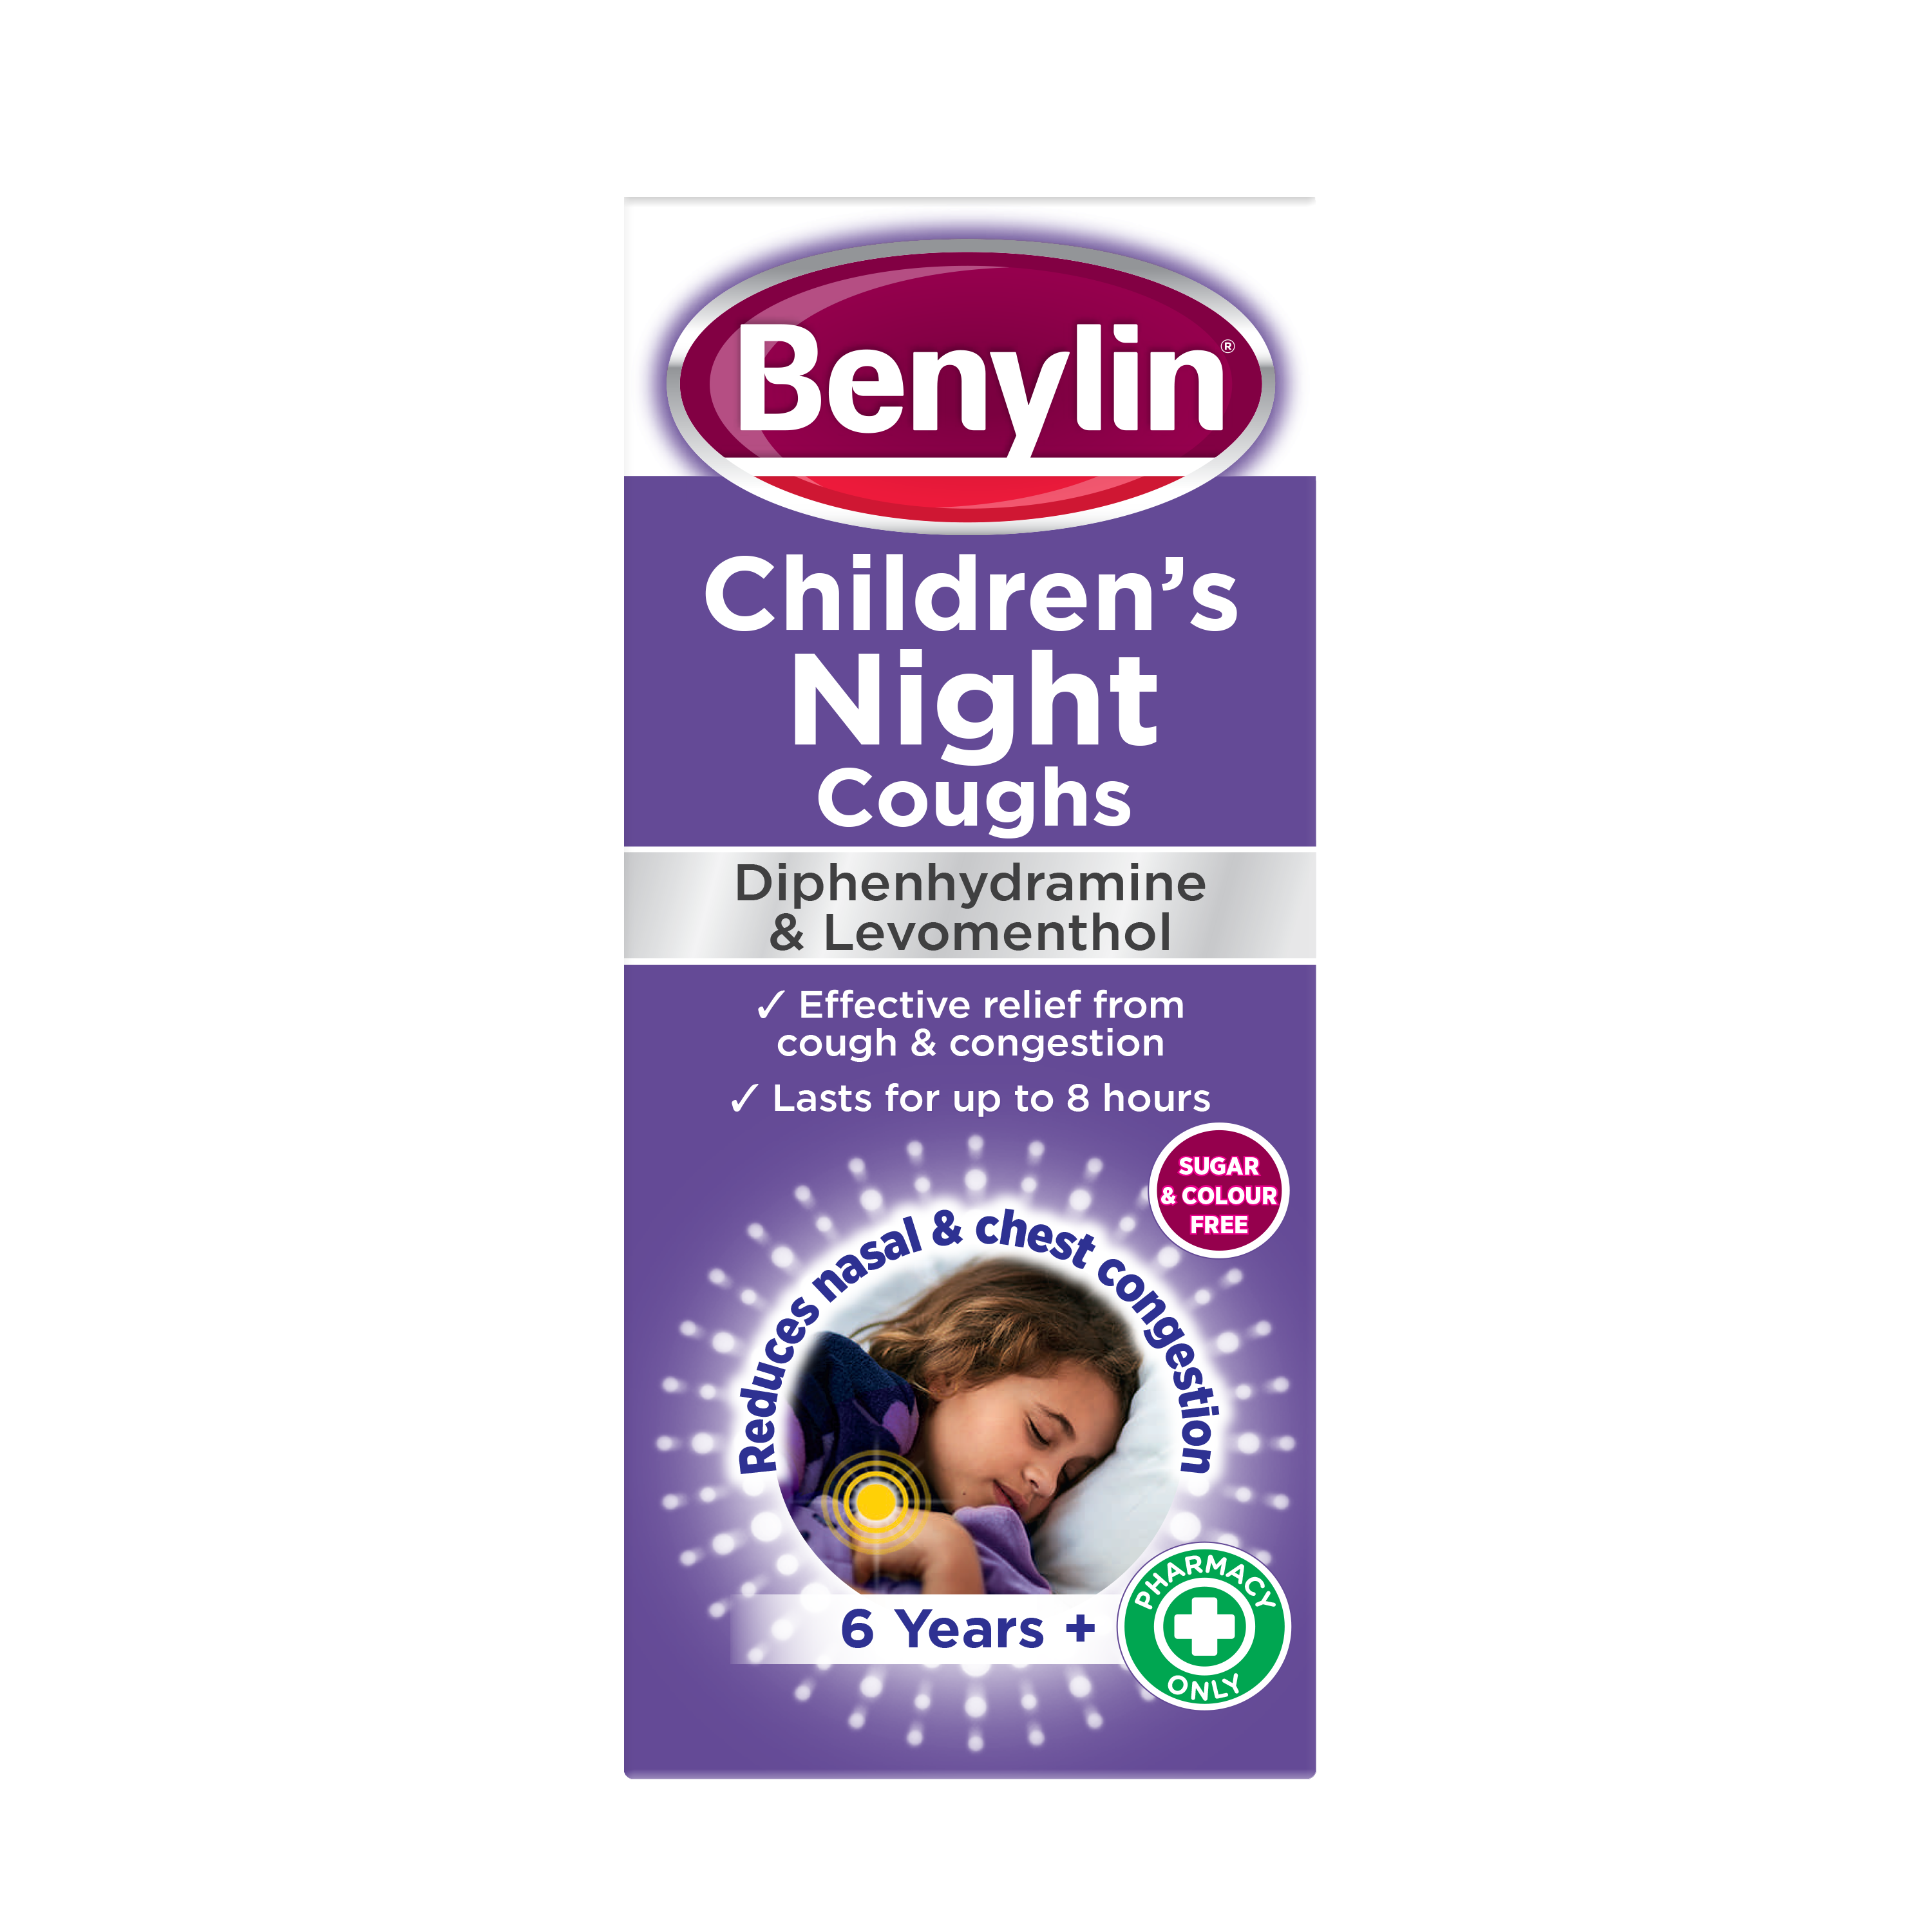 Benylin® Childrens Night Coughs Pack image